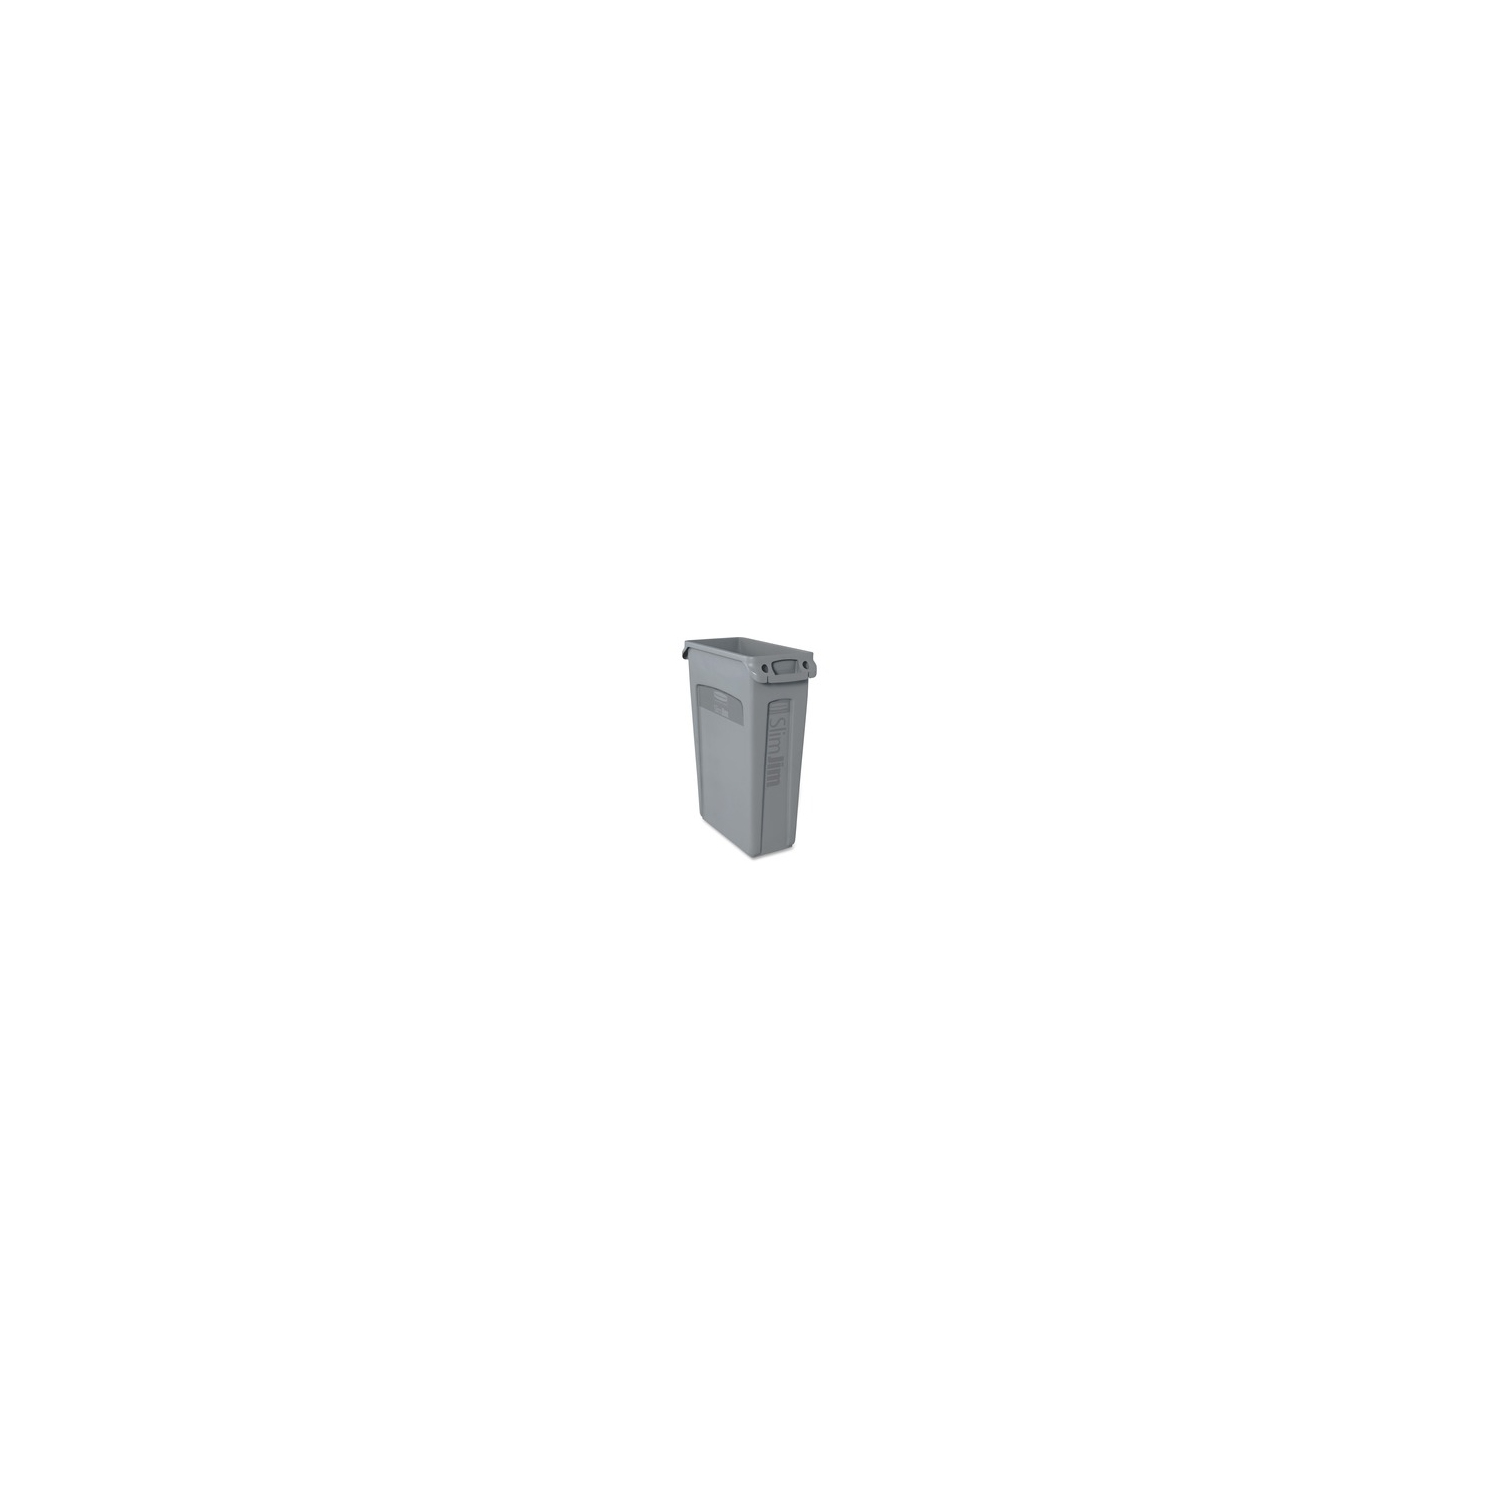 Rubbermaid Commercial Slim Jim with Venting Channels (354060GRAY)